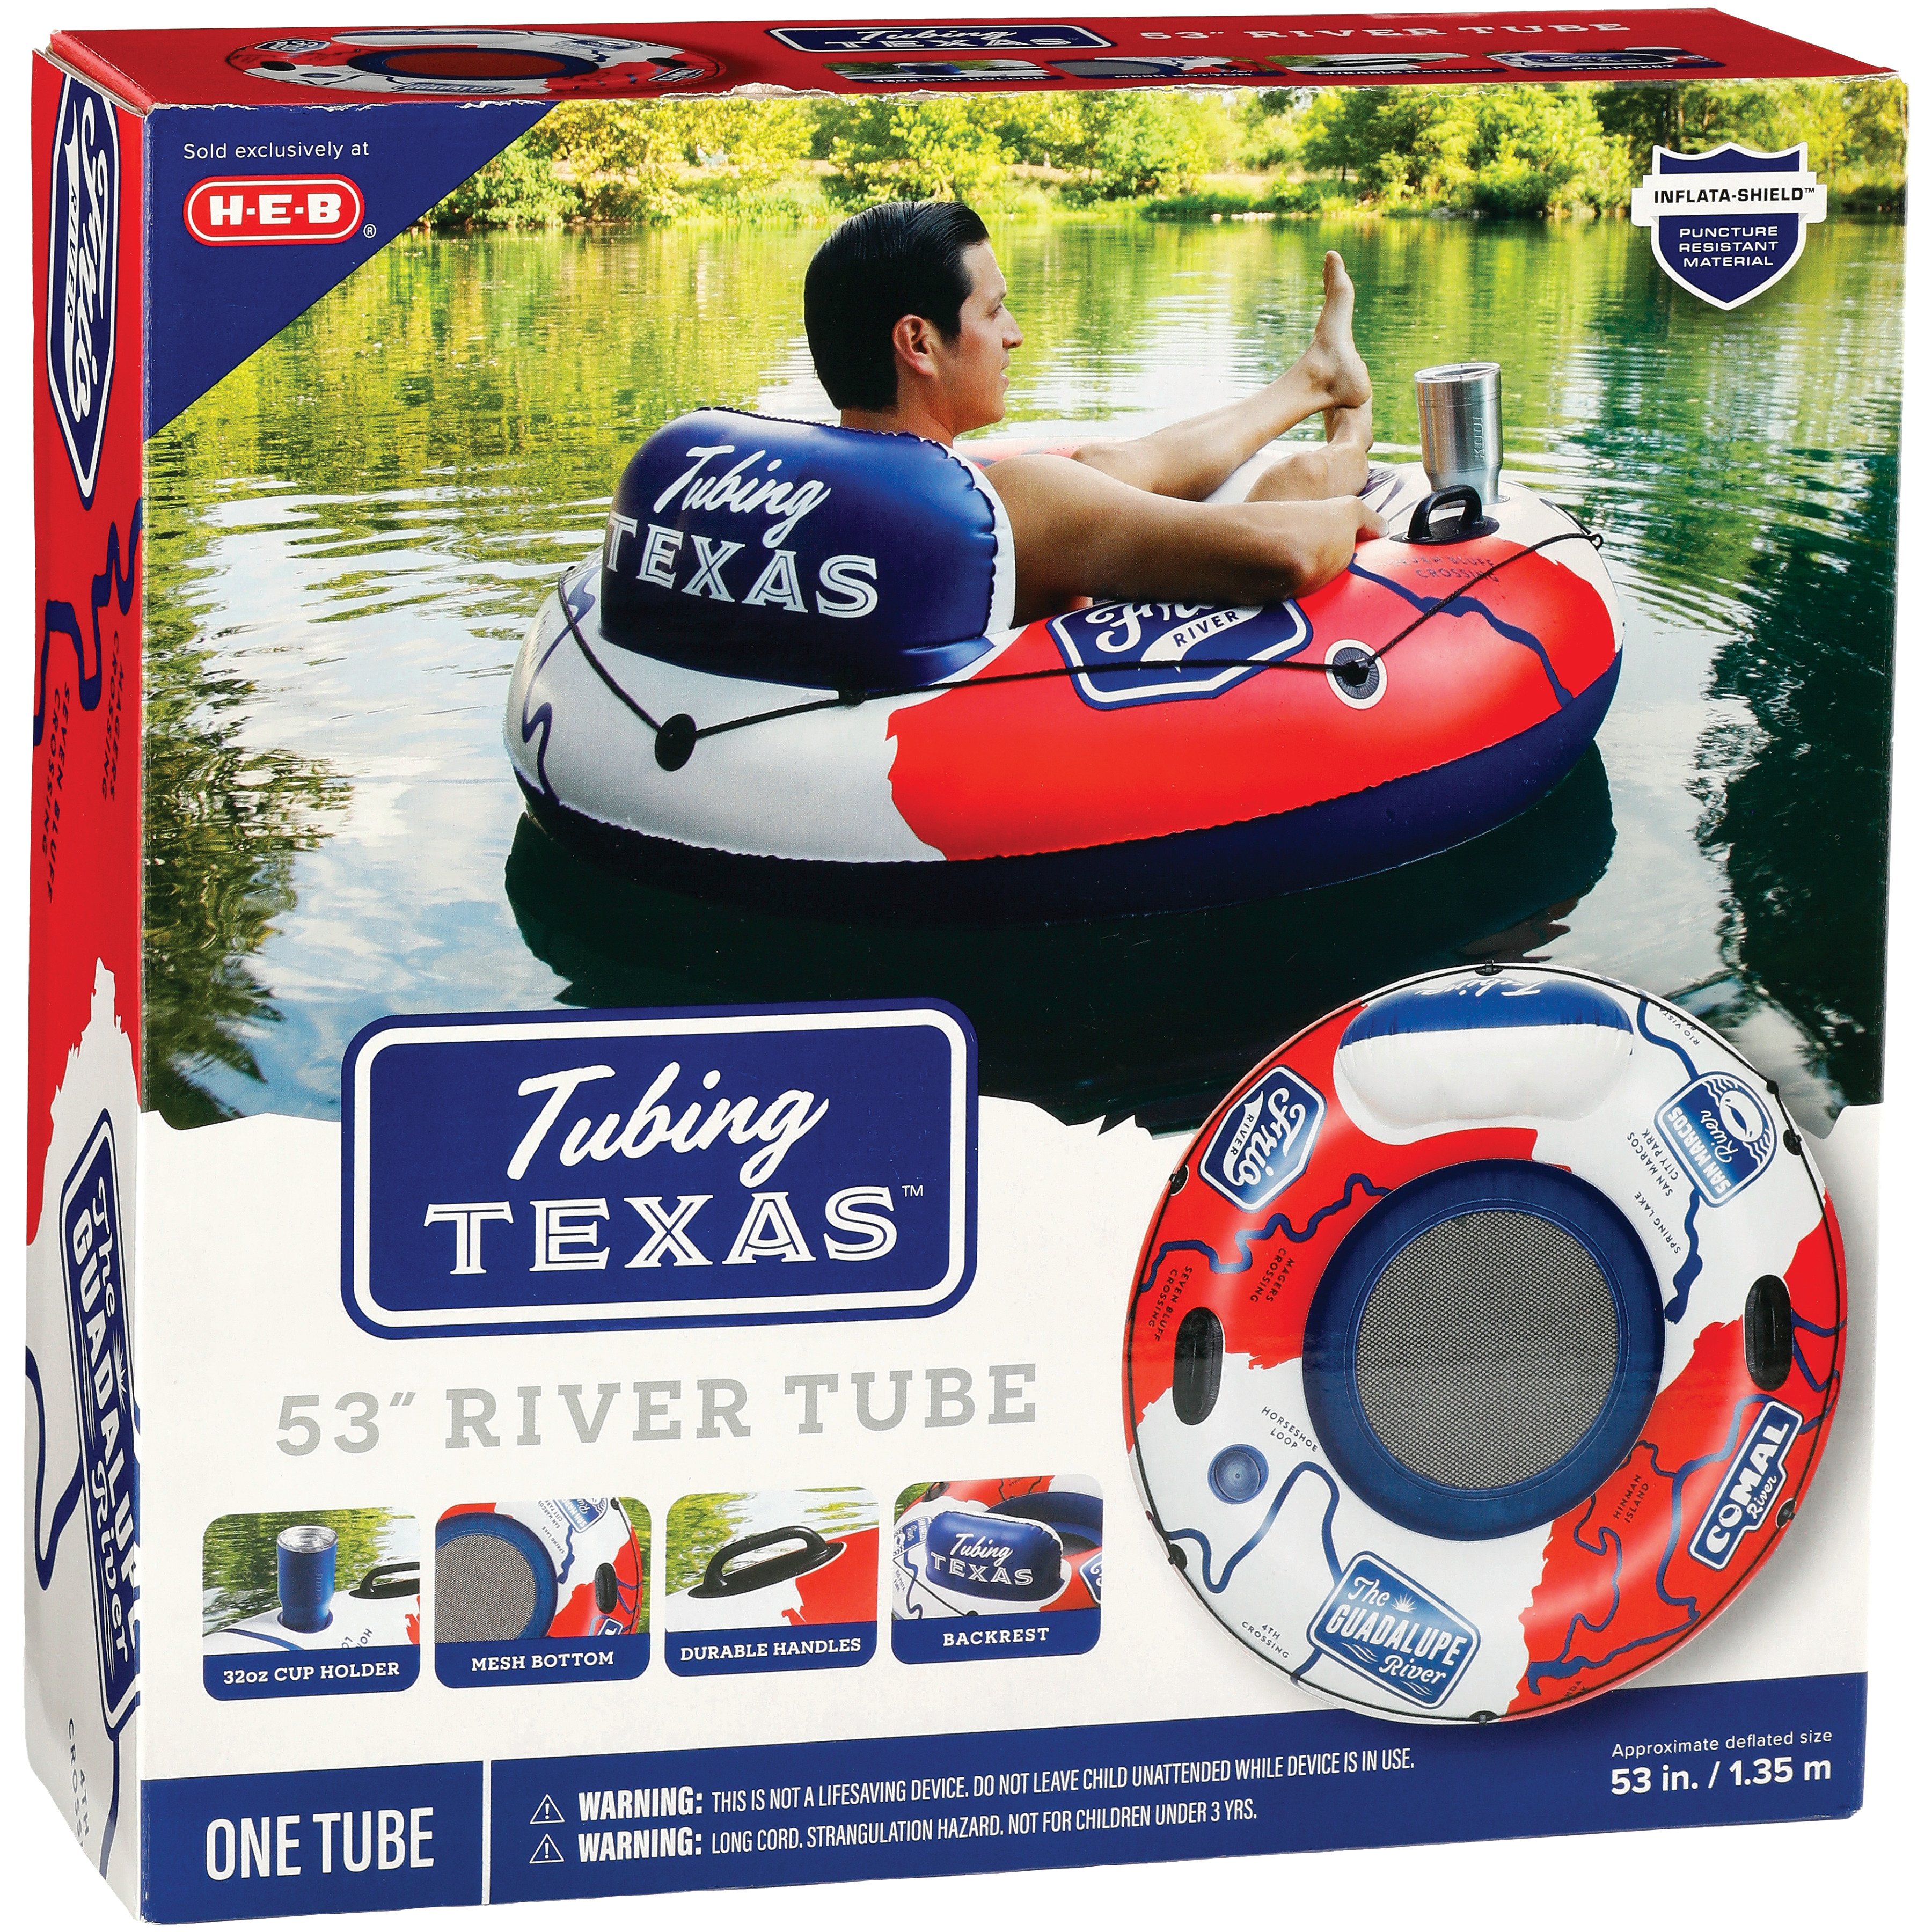 H-E-B Tubing Texas Inflatable River Tube - Red - Shop Floats at H-E-B